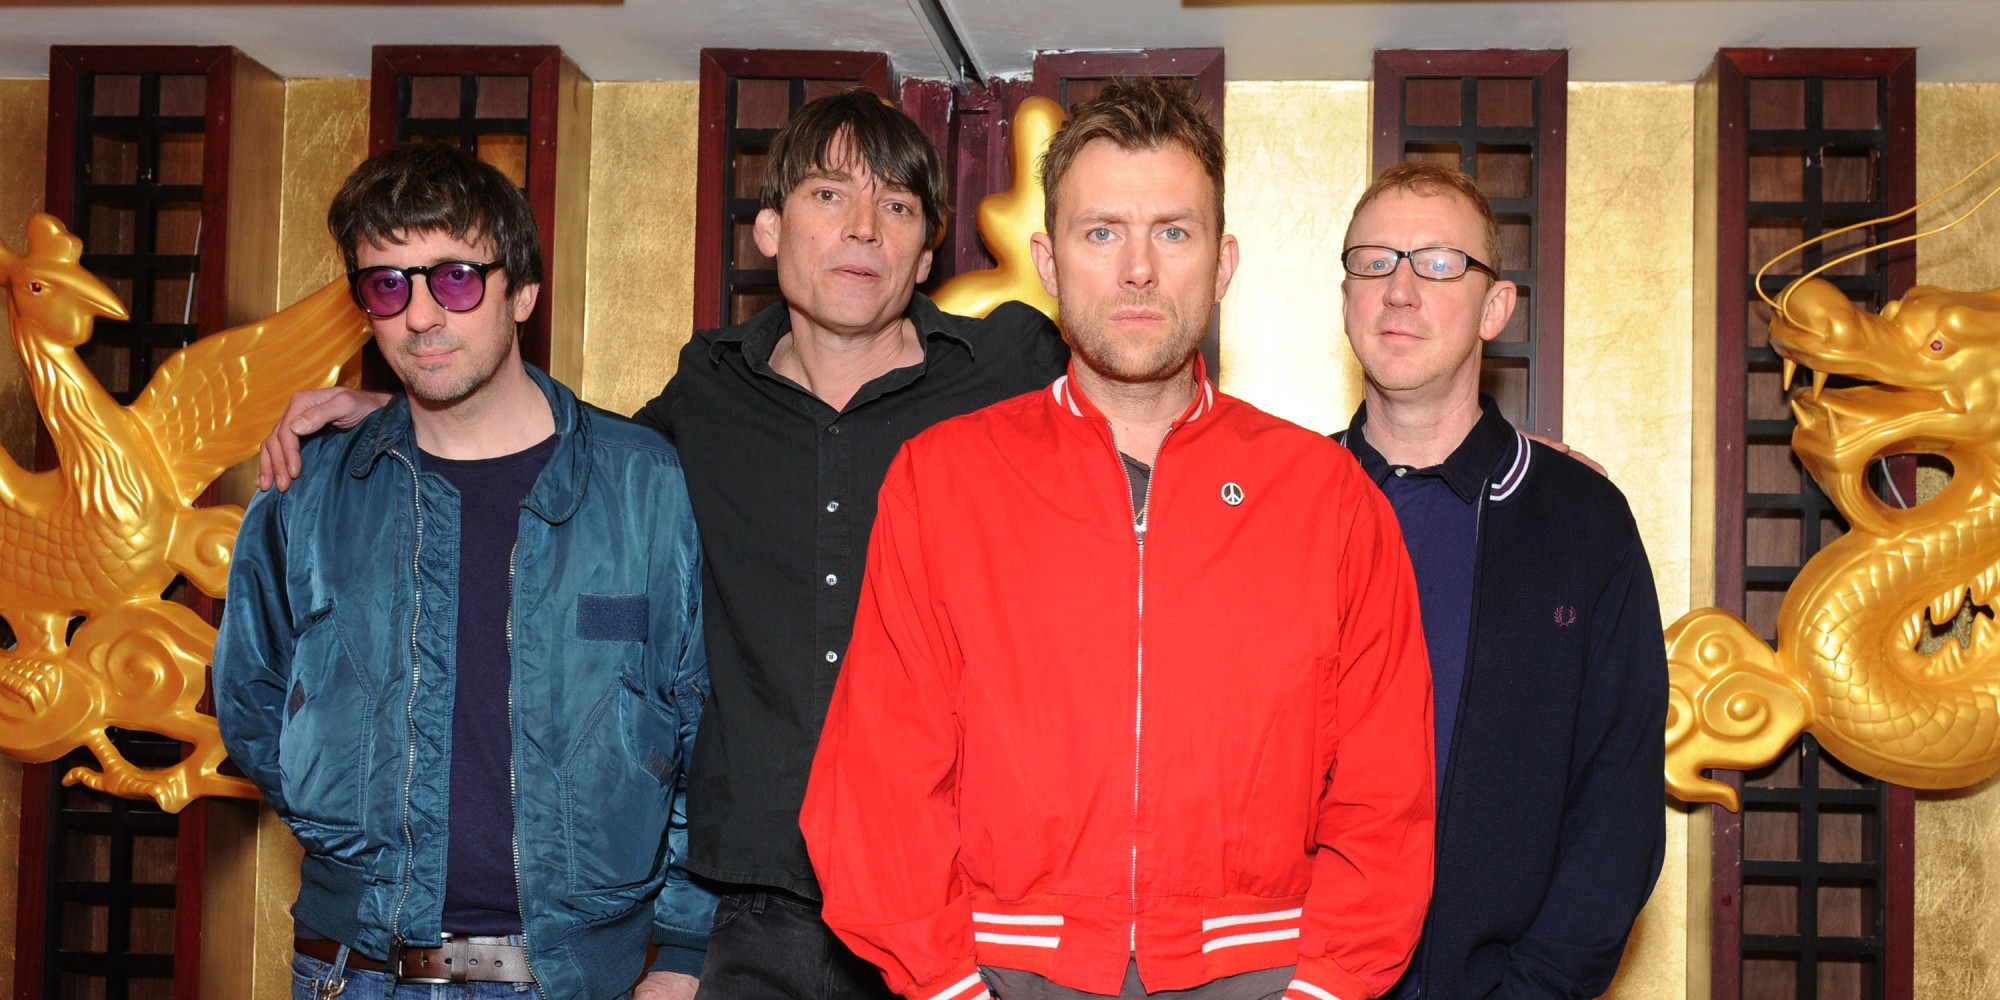 Blur New Album Band Reveal New Track 'Go Out' And Announce Plans To